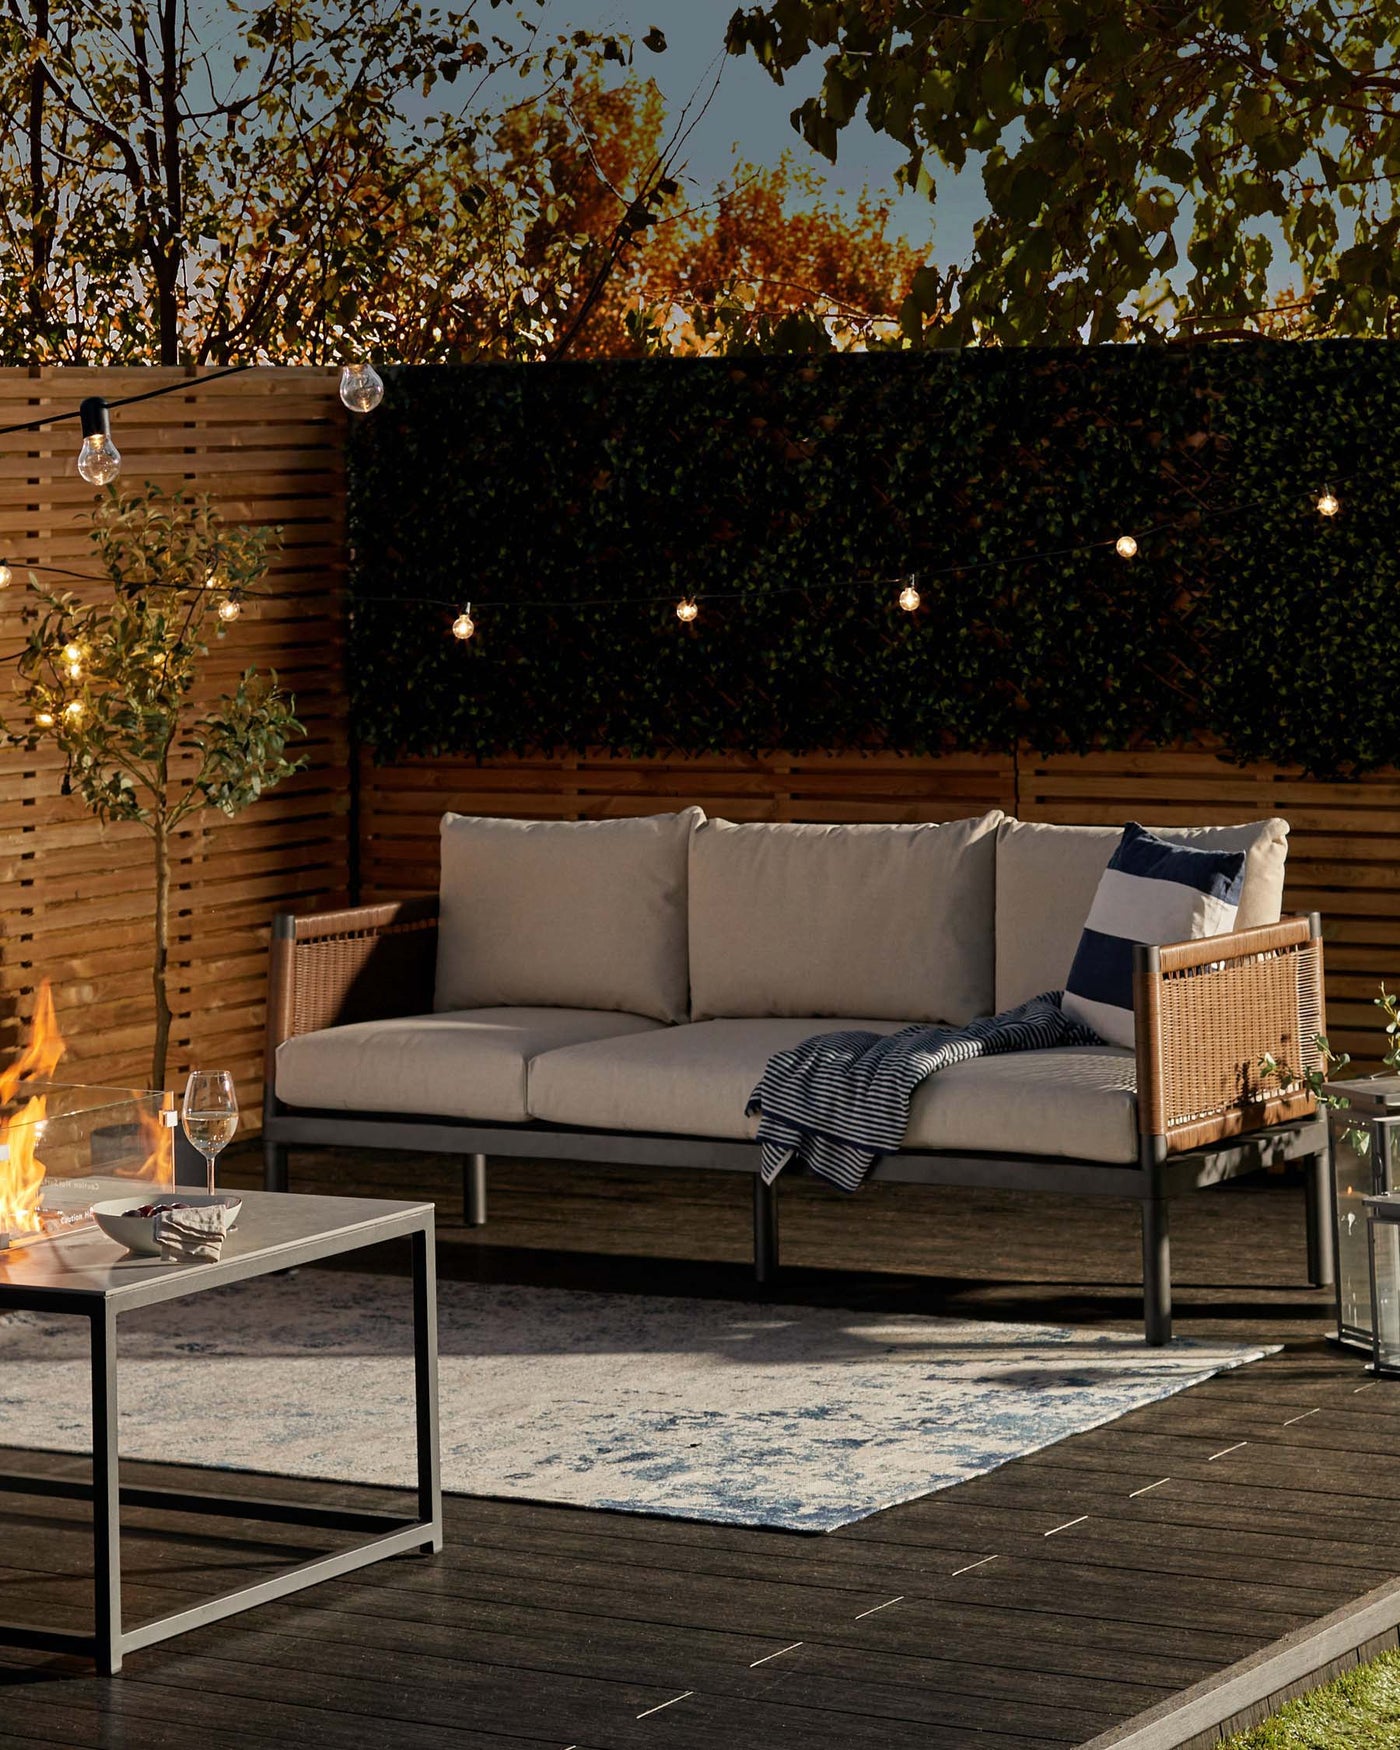 Outdoor patio setting featuring a modern sectional sofa with a metal frame and light wooden armrests, complemented by neutral-toned cushions. In front of the sofa is a sleek, square metal coffee table. The arrangement is centred on an area rug with a faded blue and cream pattern. Decorative string lights add ambiance above the cosy setup.